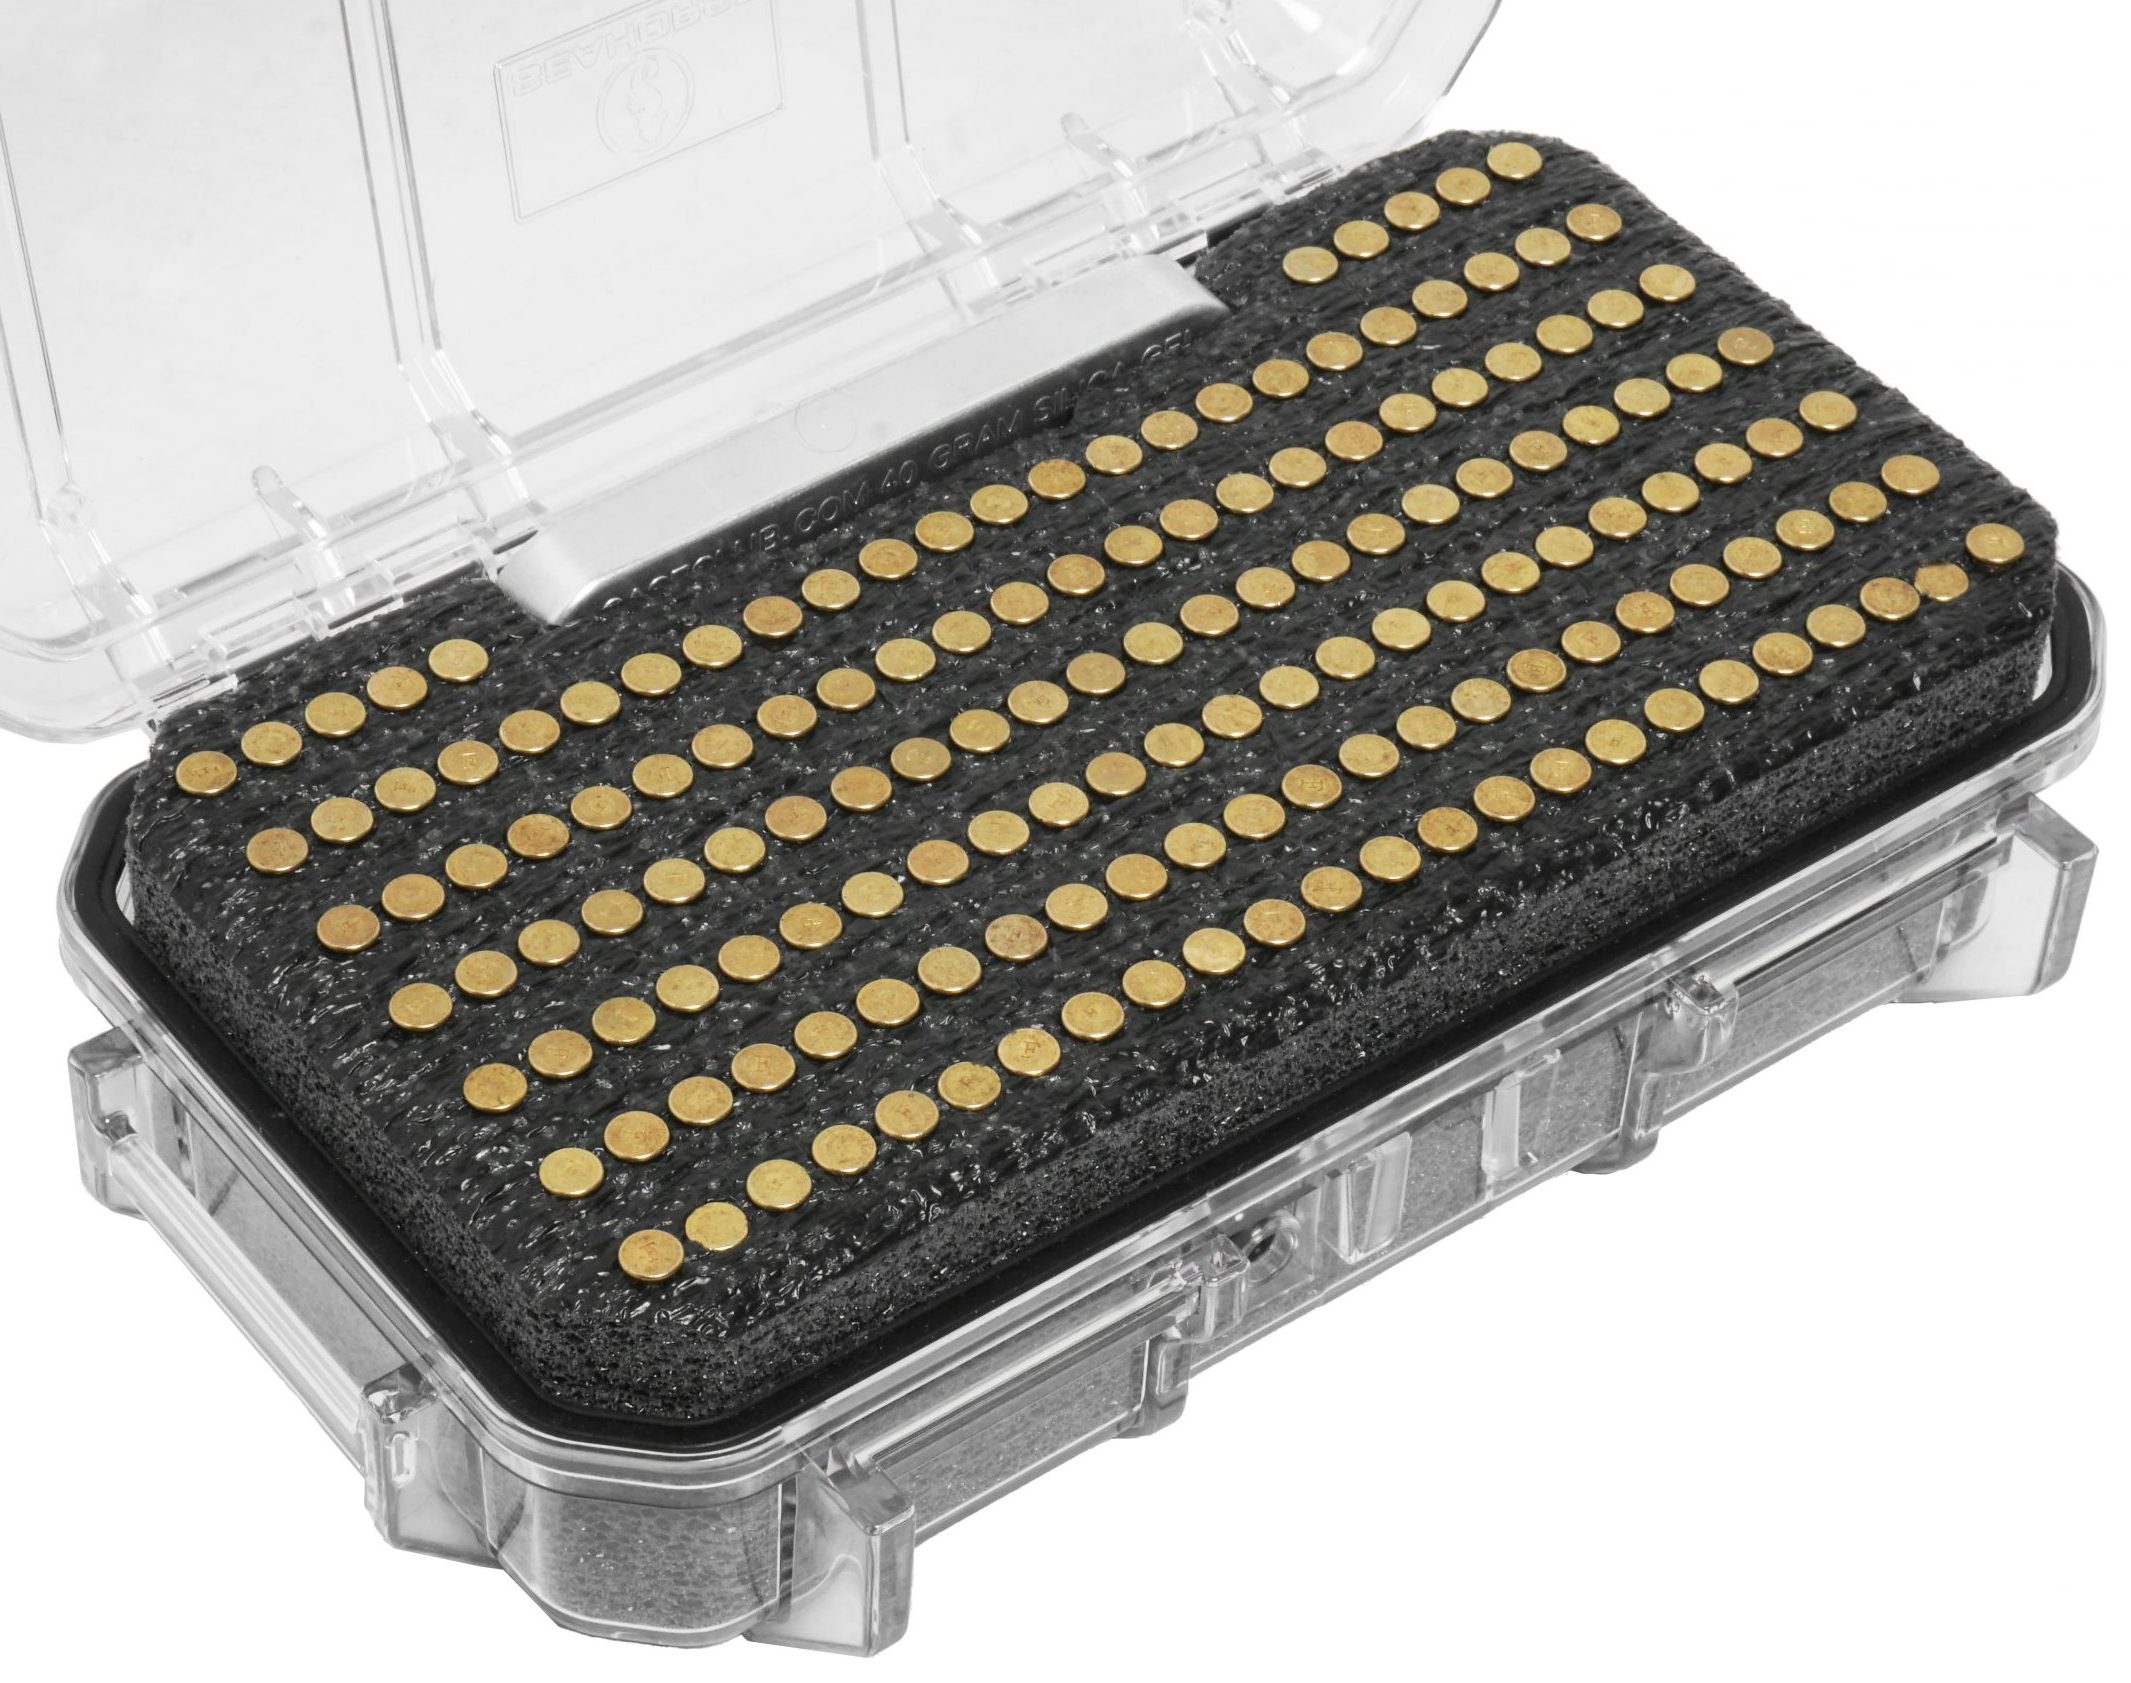 Case Club Waterproof Ammunition Case for Long Term Storage with Built-in Locking Latch & Included Silica Gel Canister to Prevent Ammo Rust 